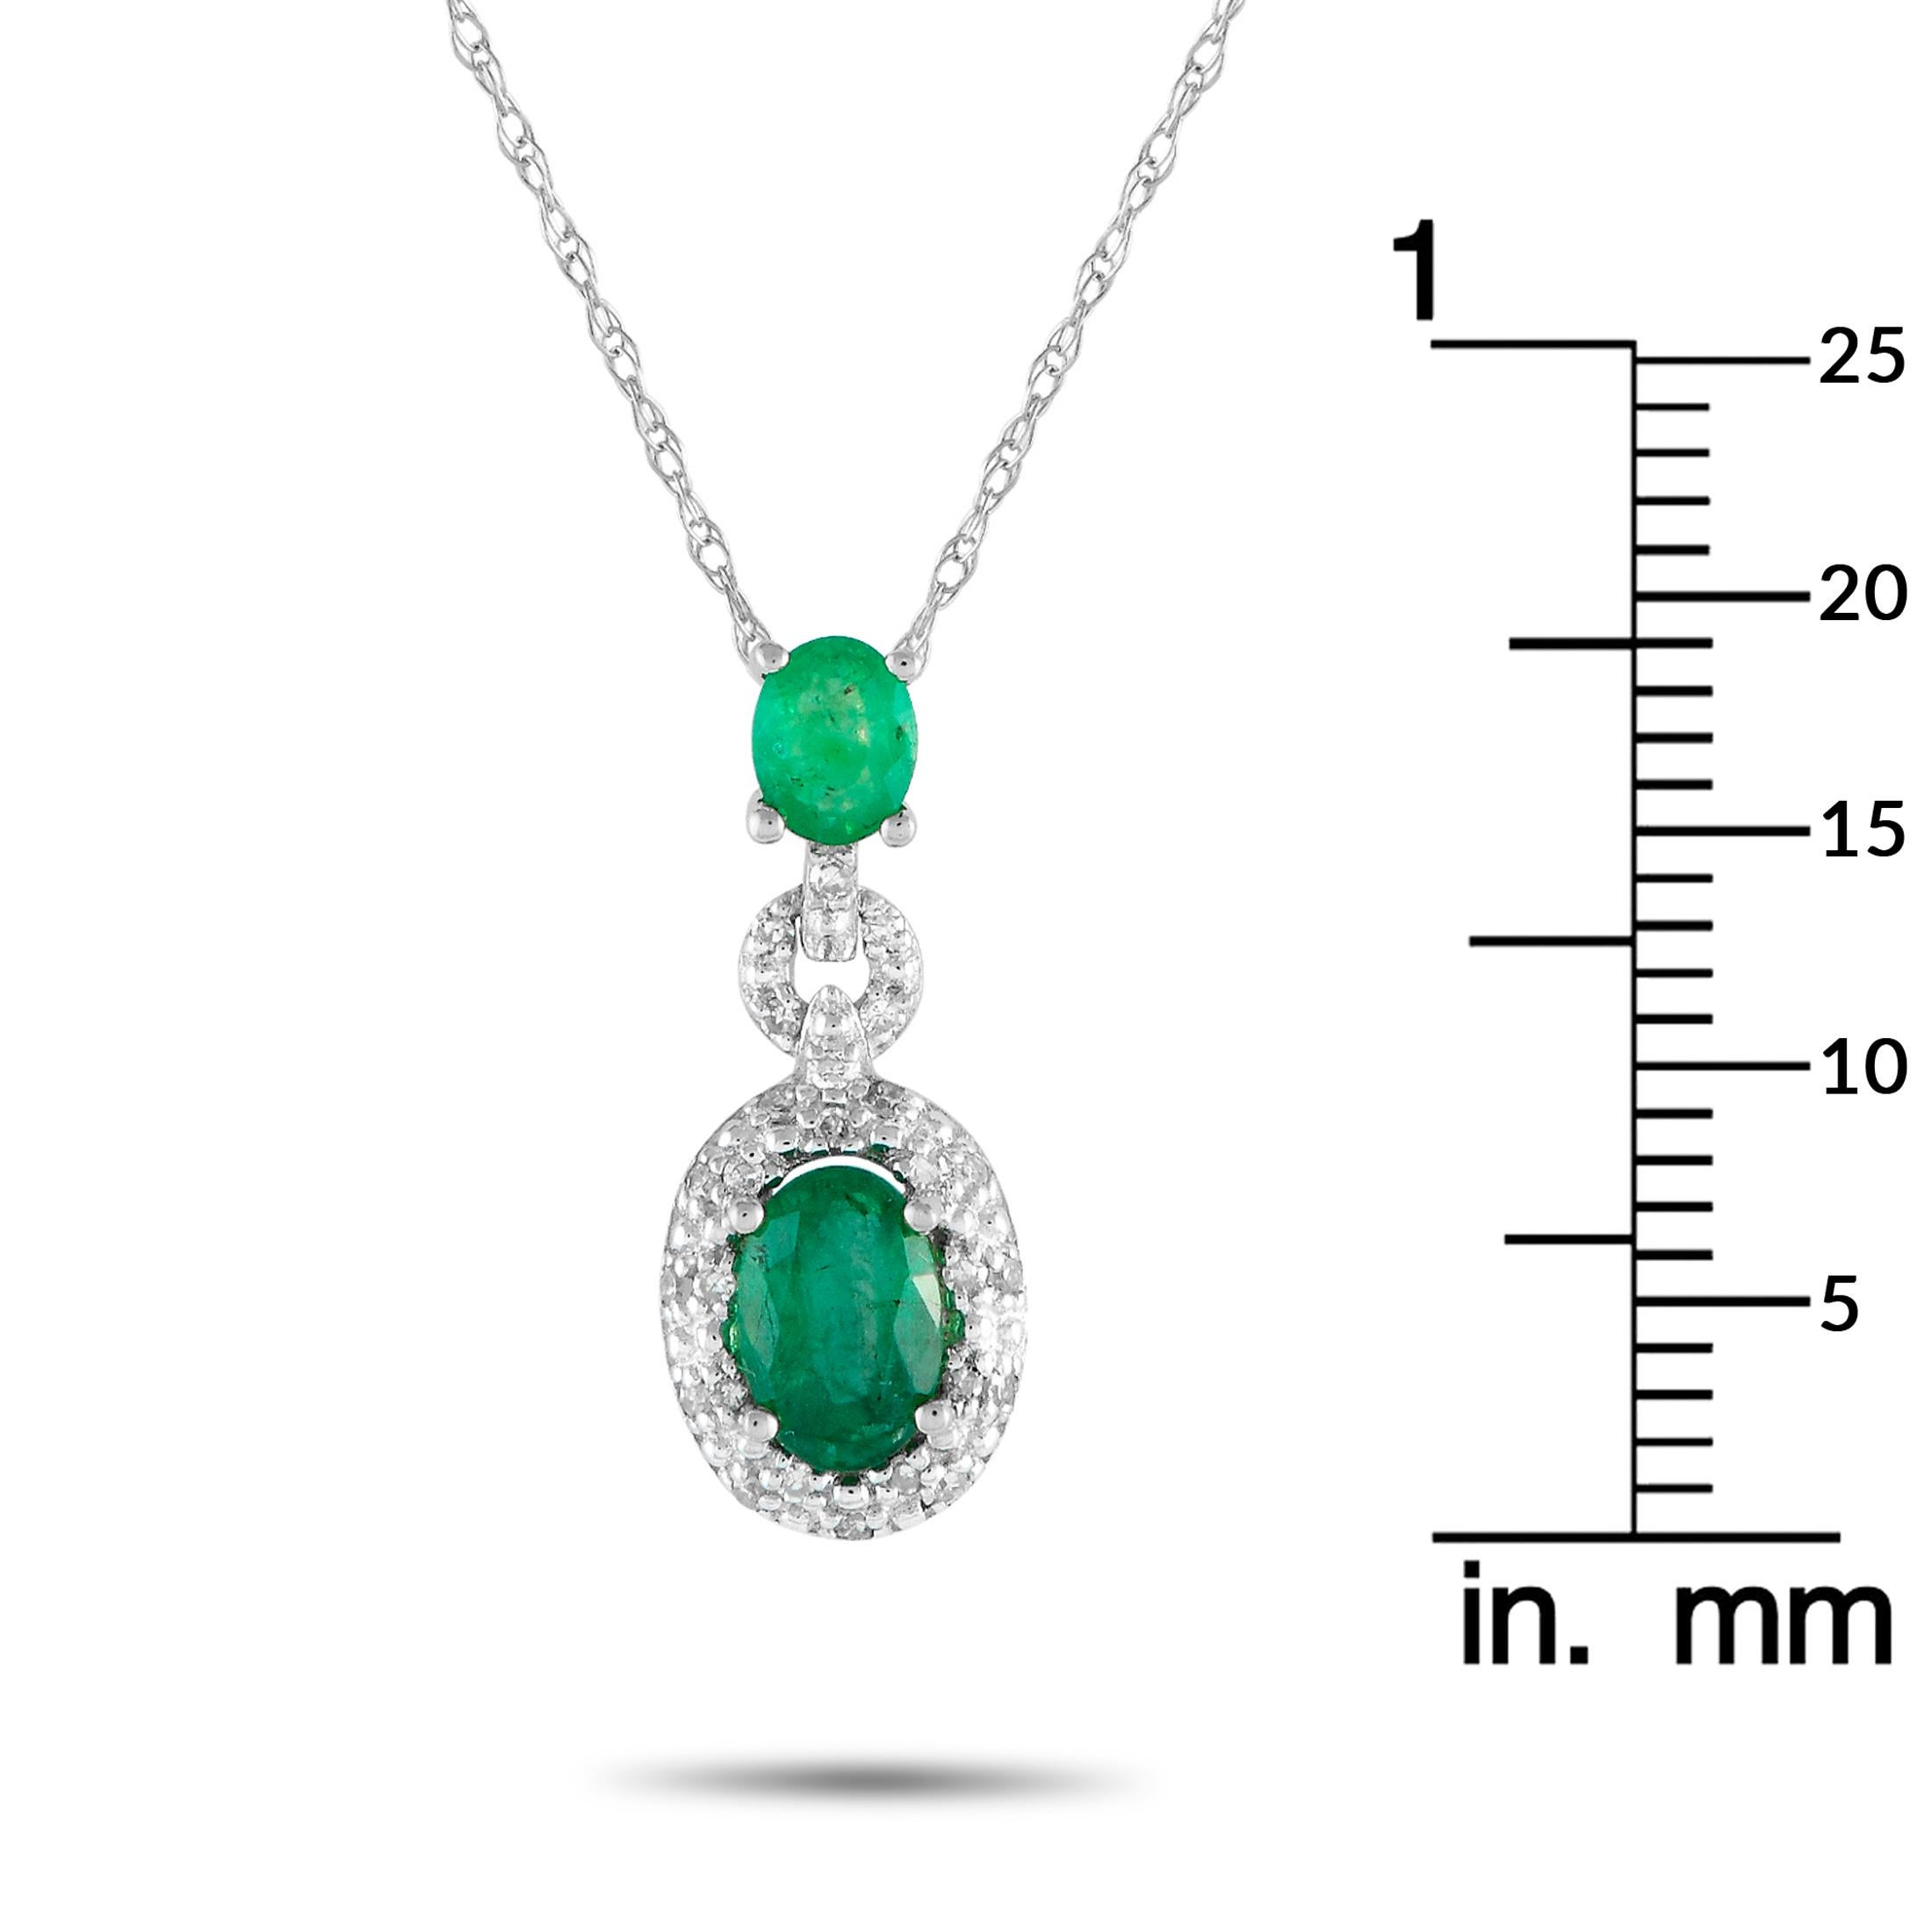 LB Exclusive 14K White Gold 0.08ct Diamond and Emerald Necklace PD4-16183WEM In New Condition For Sale In Southampton, PA